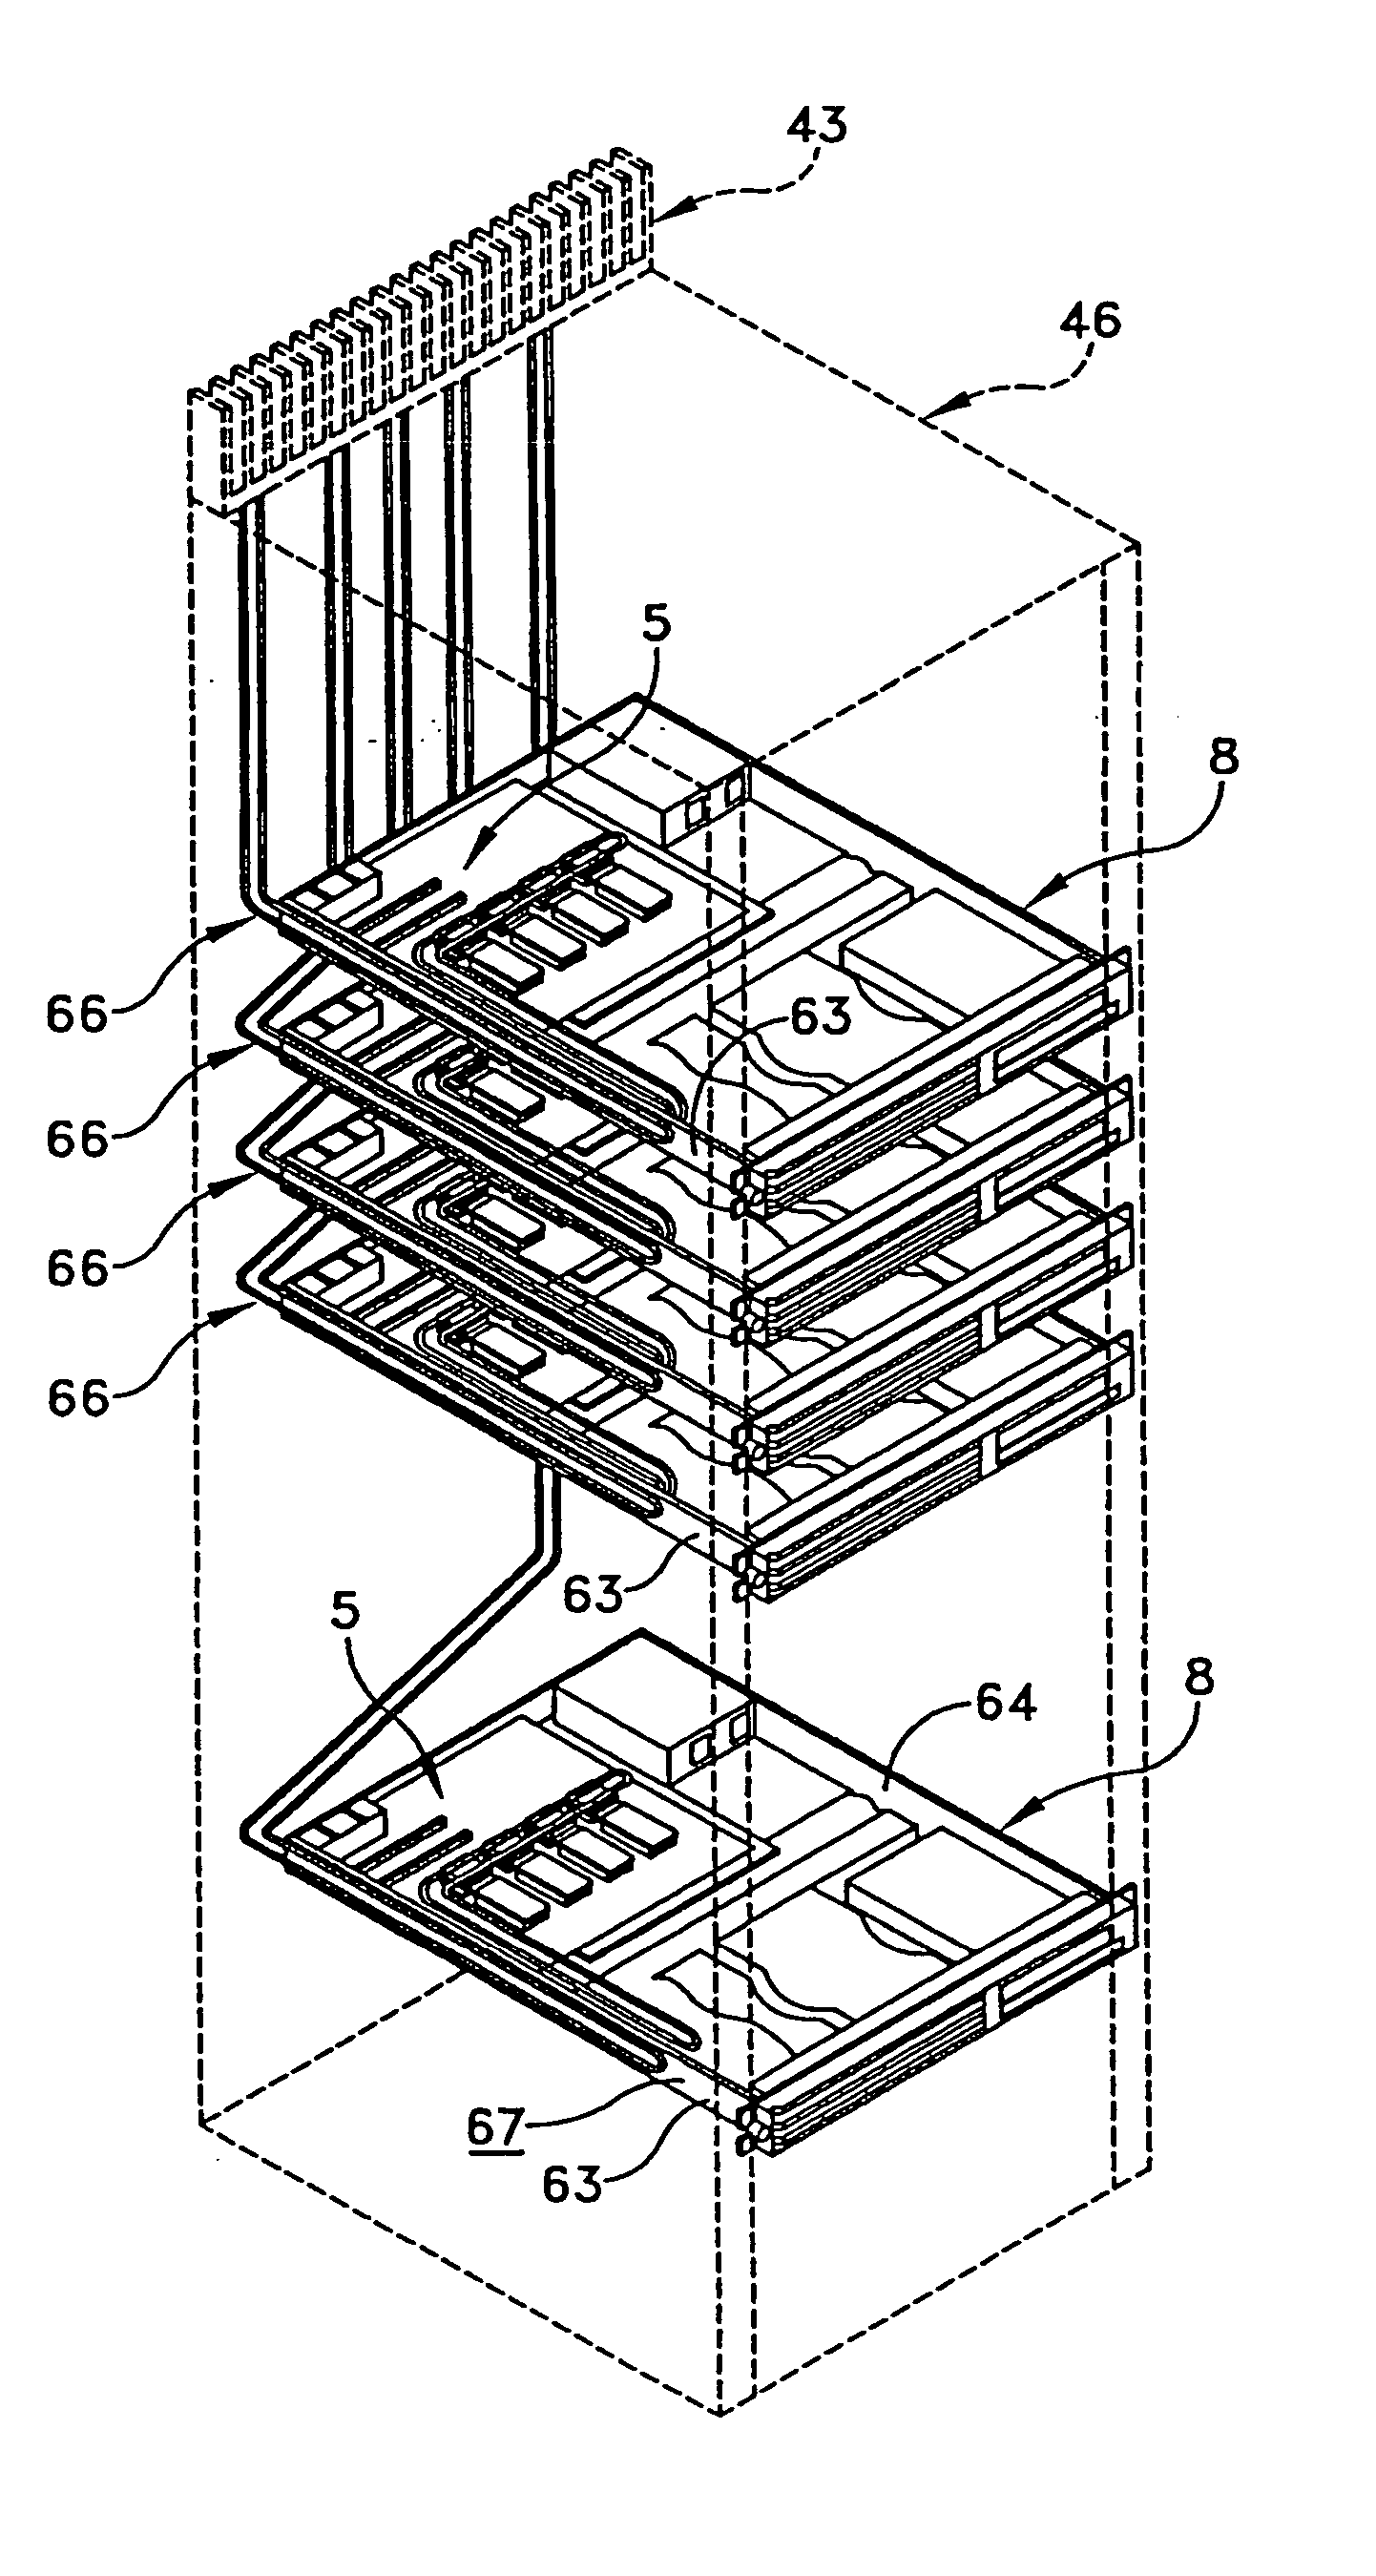 Thermal management system and method for electronics system